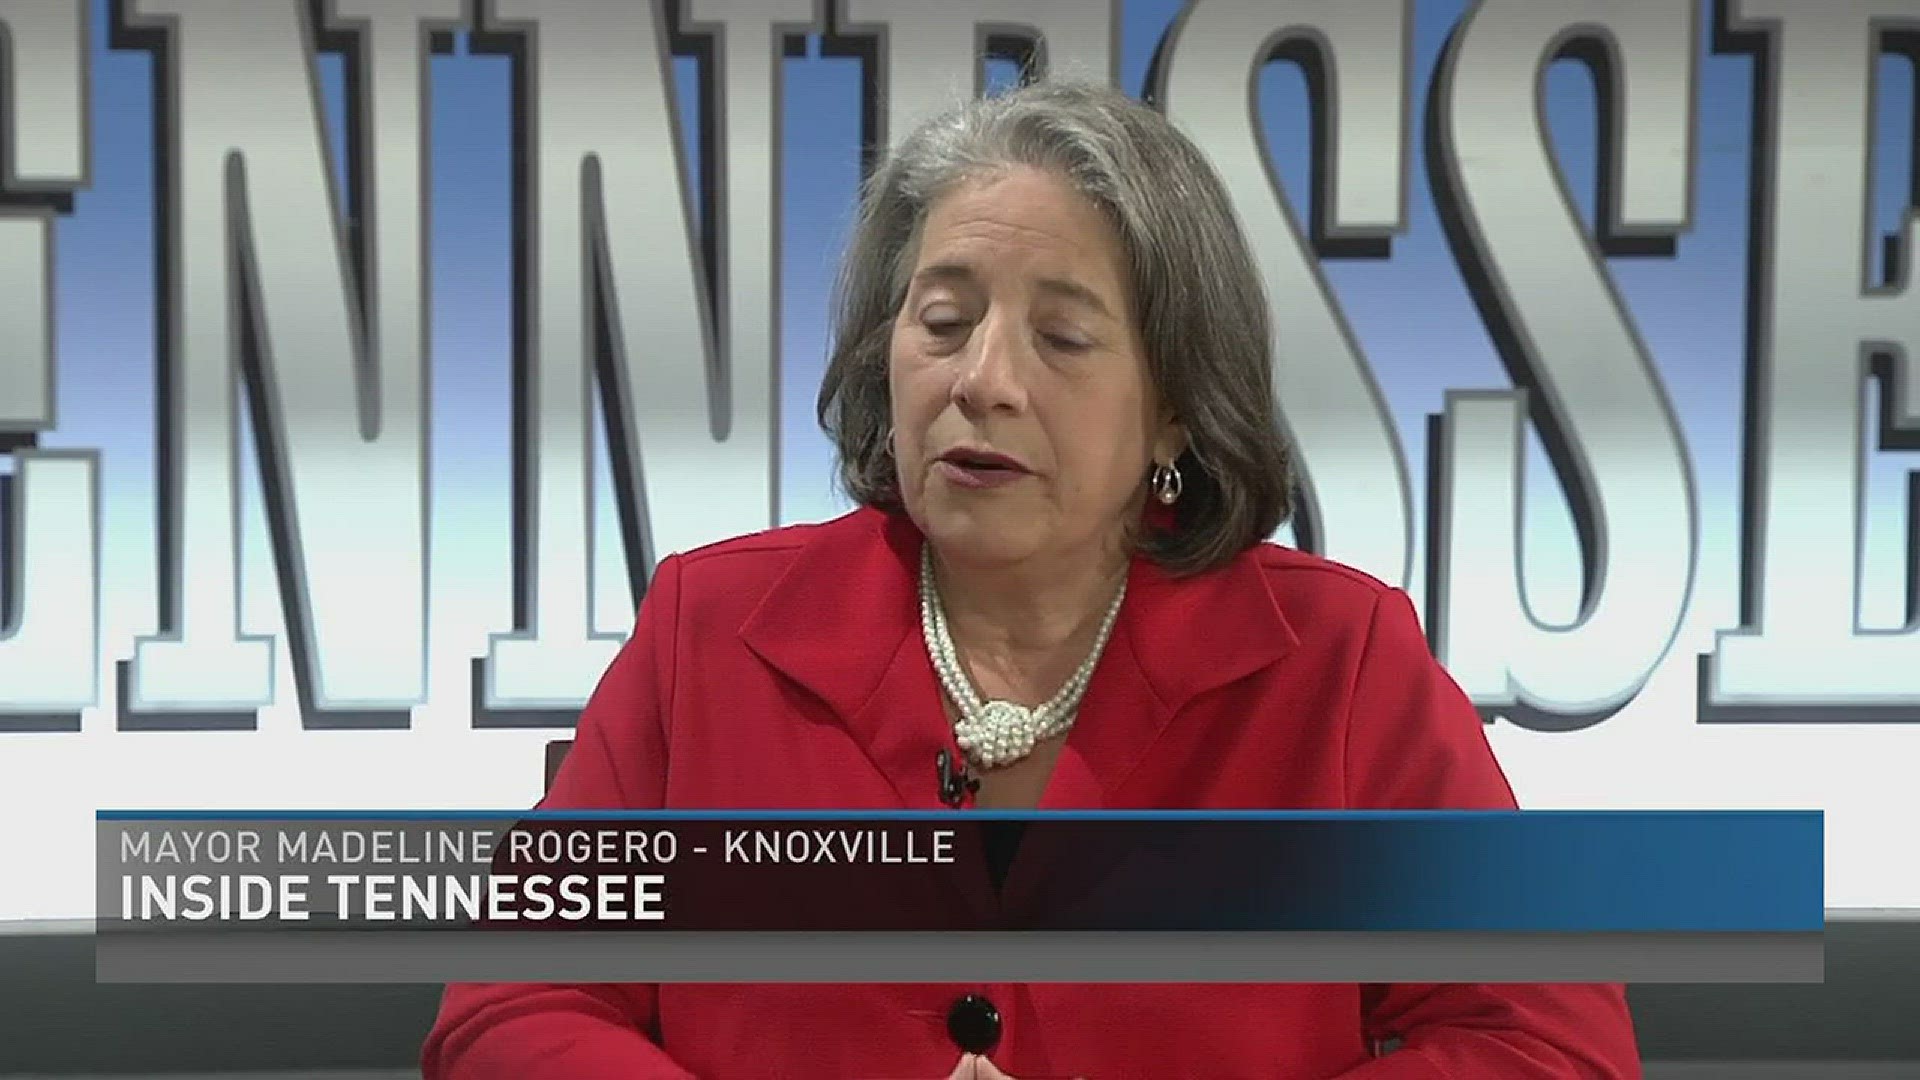 Knoxville Mayor Madeline Rogero talks about her plans for the city in the coming months.